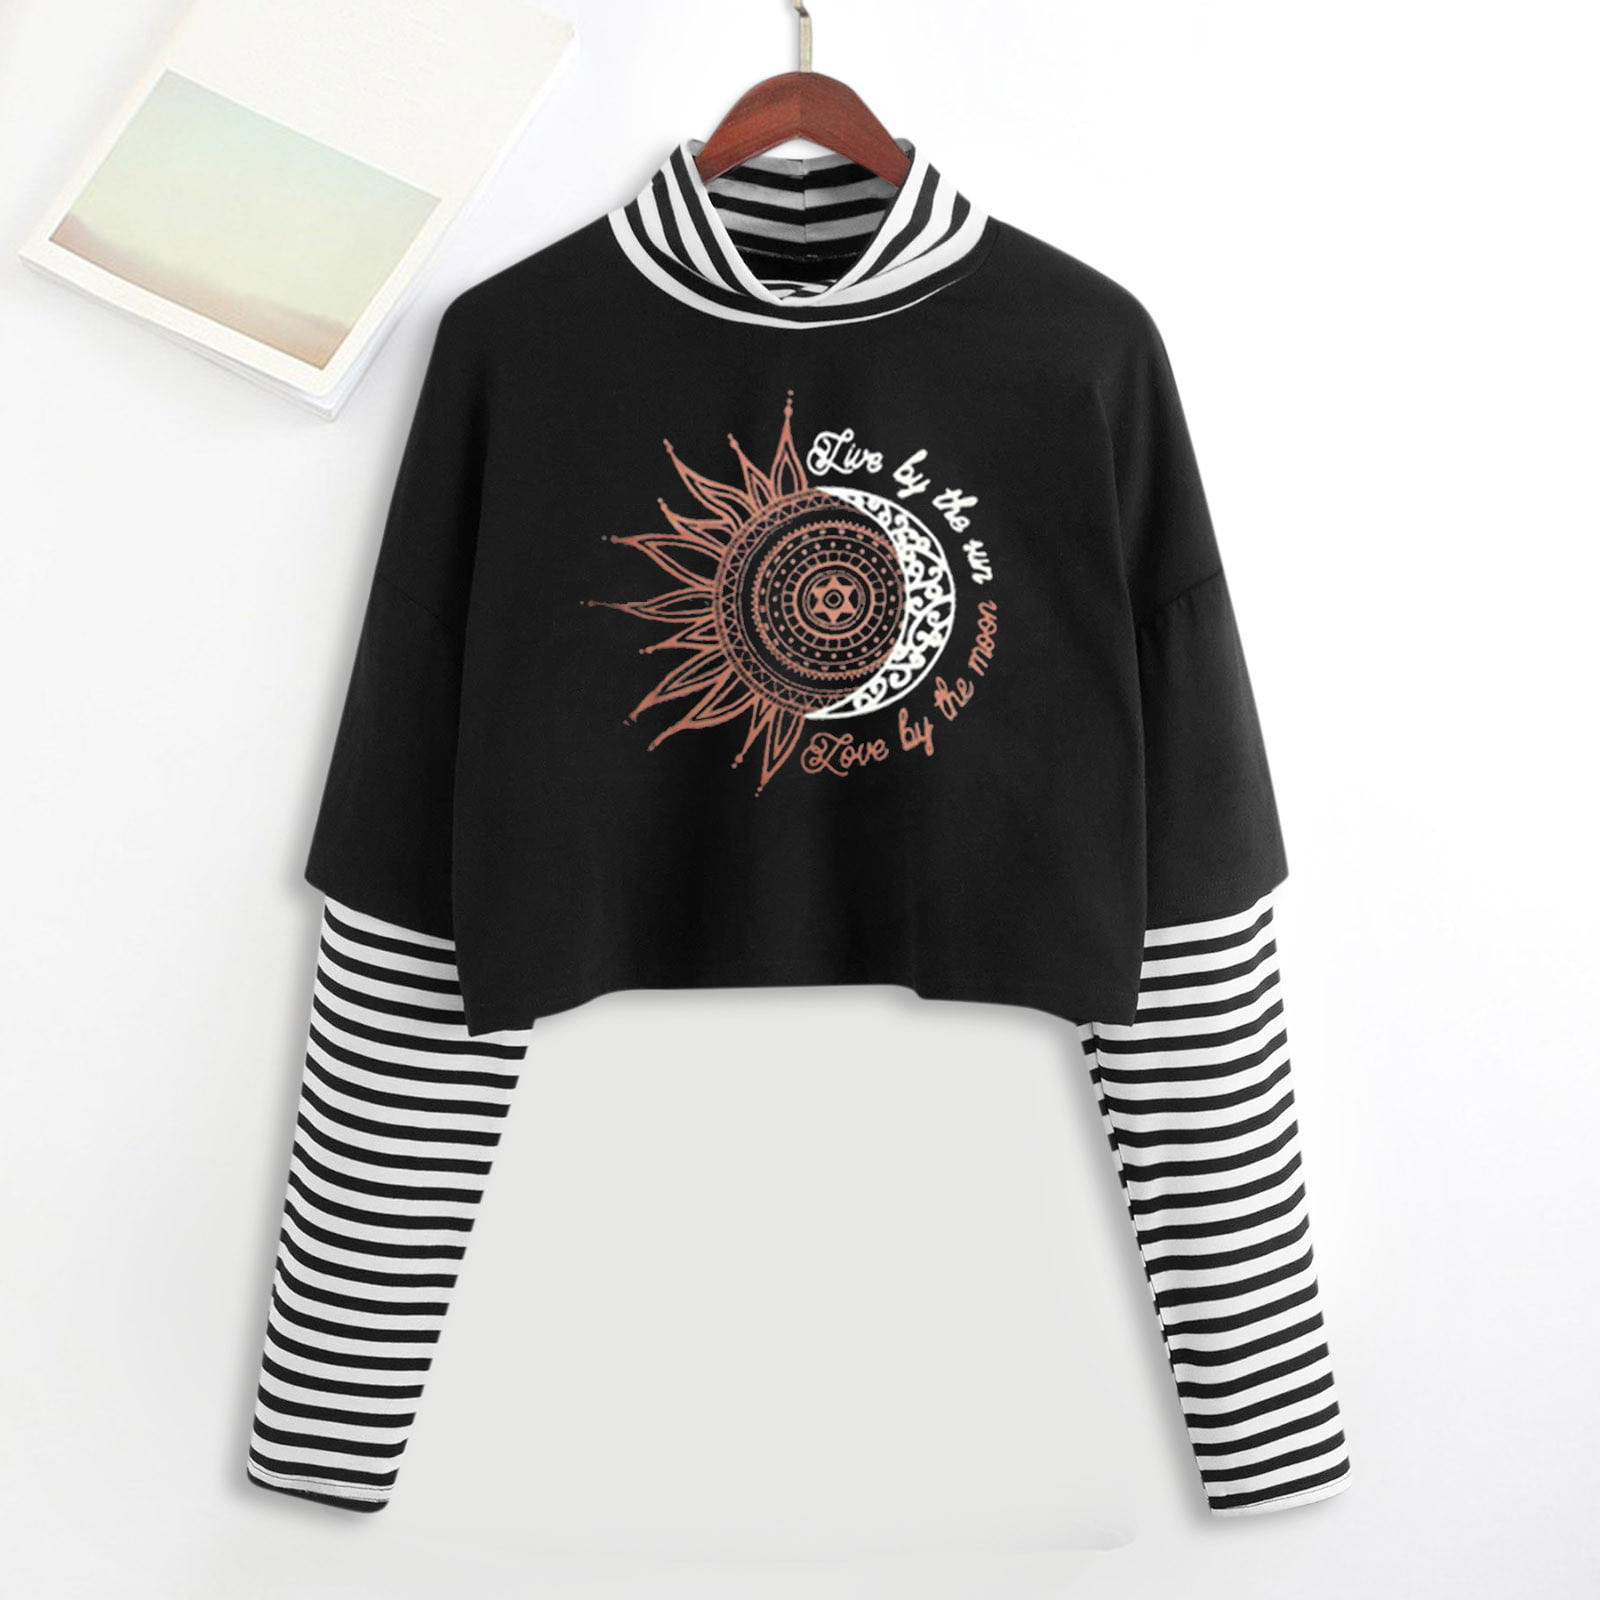 Misaky Long Sleeve Tops for Women Fashion Casual Round Neck Letter Printed Loose Sweater 